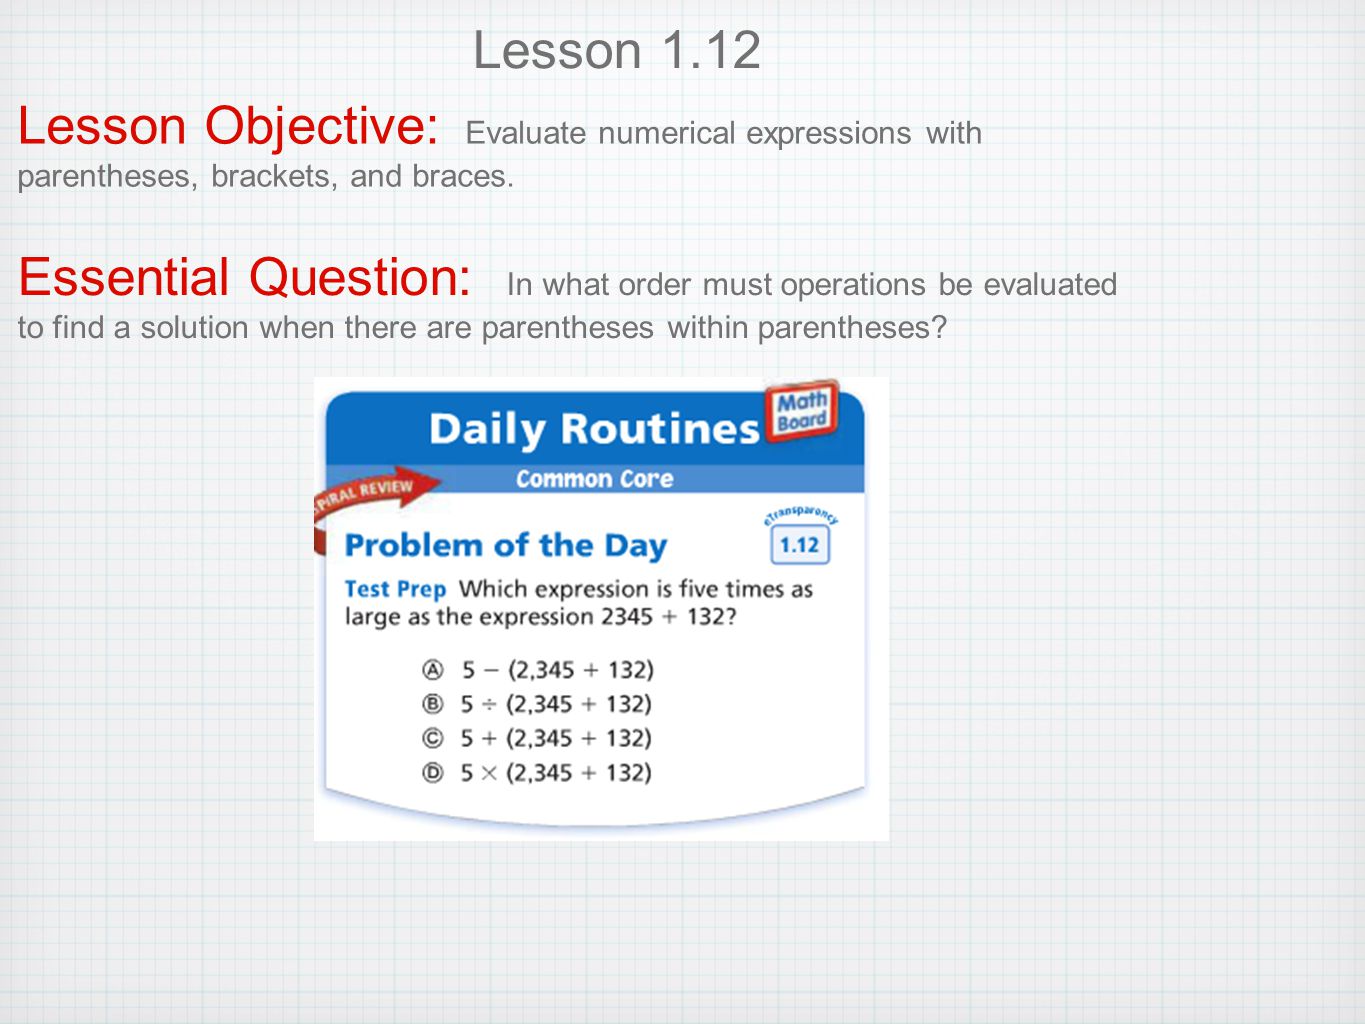 Lesson 1.12 Lesson Objective: Evaluate numerical expressions with parentheses, brackets, and braces.